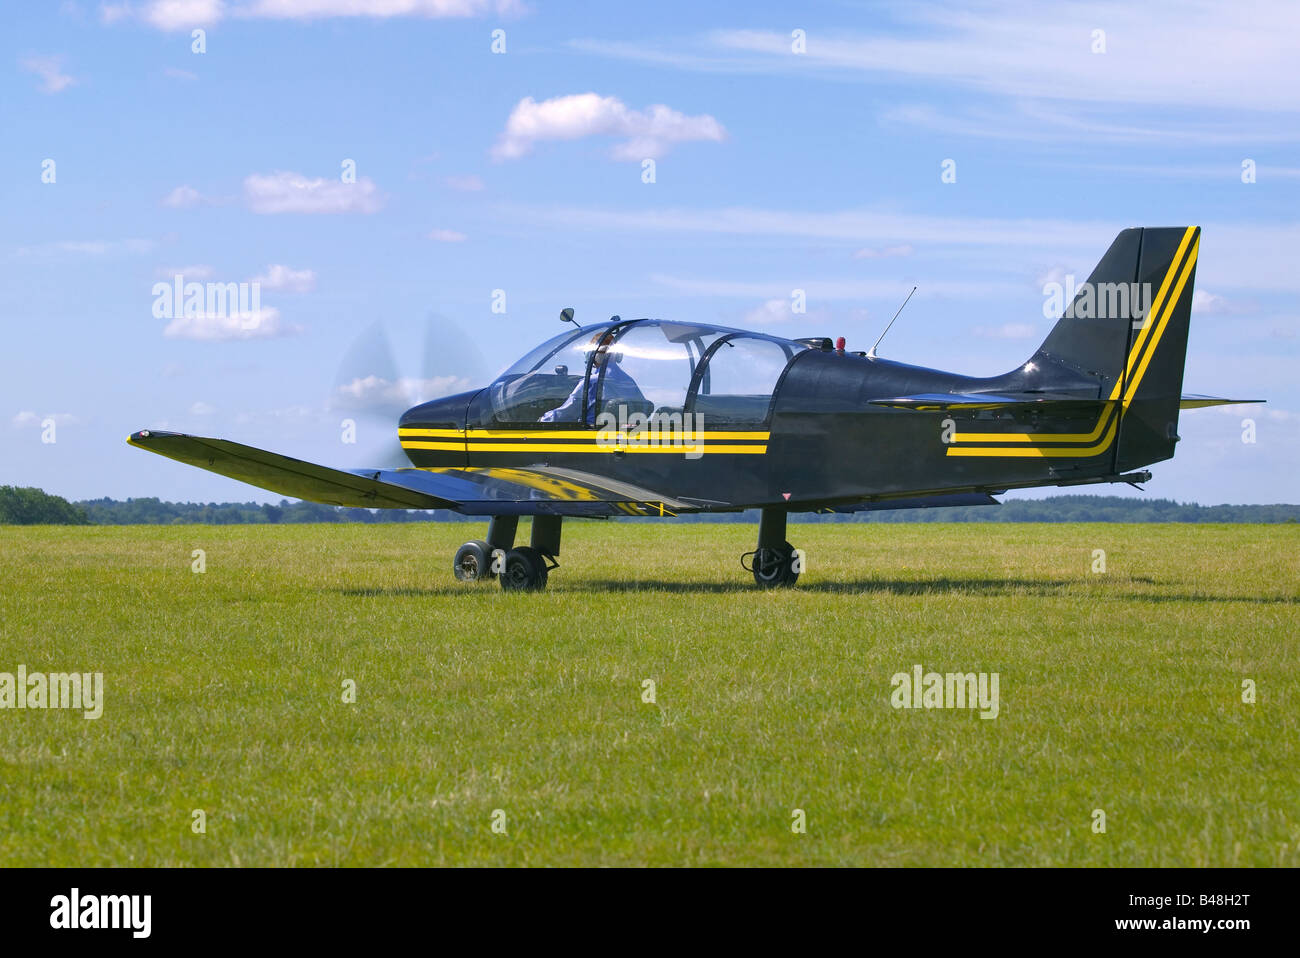 Single propeller light aircraft on a grass runway waiting for clearence to take off Stock Photo